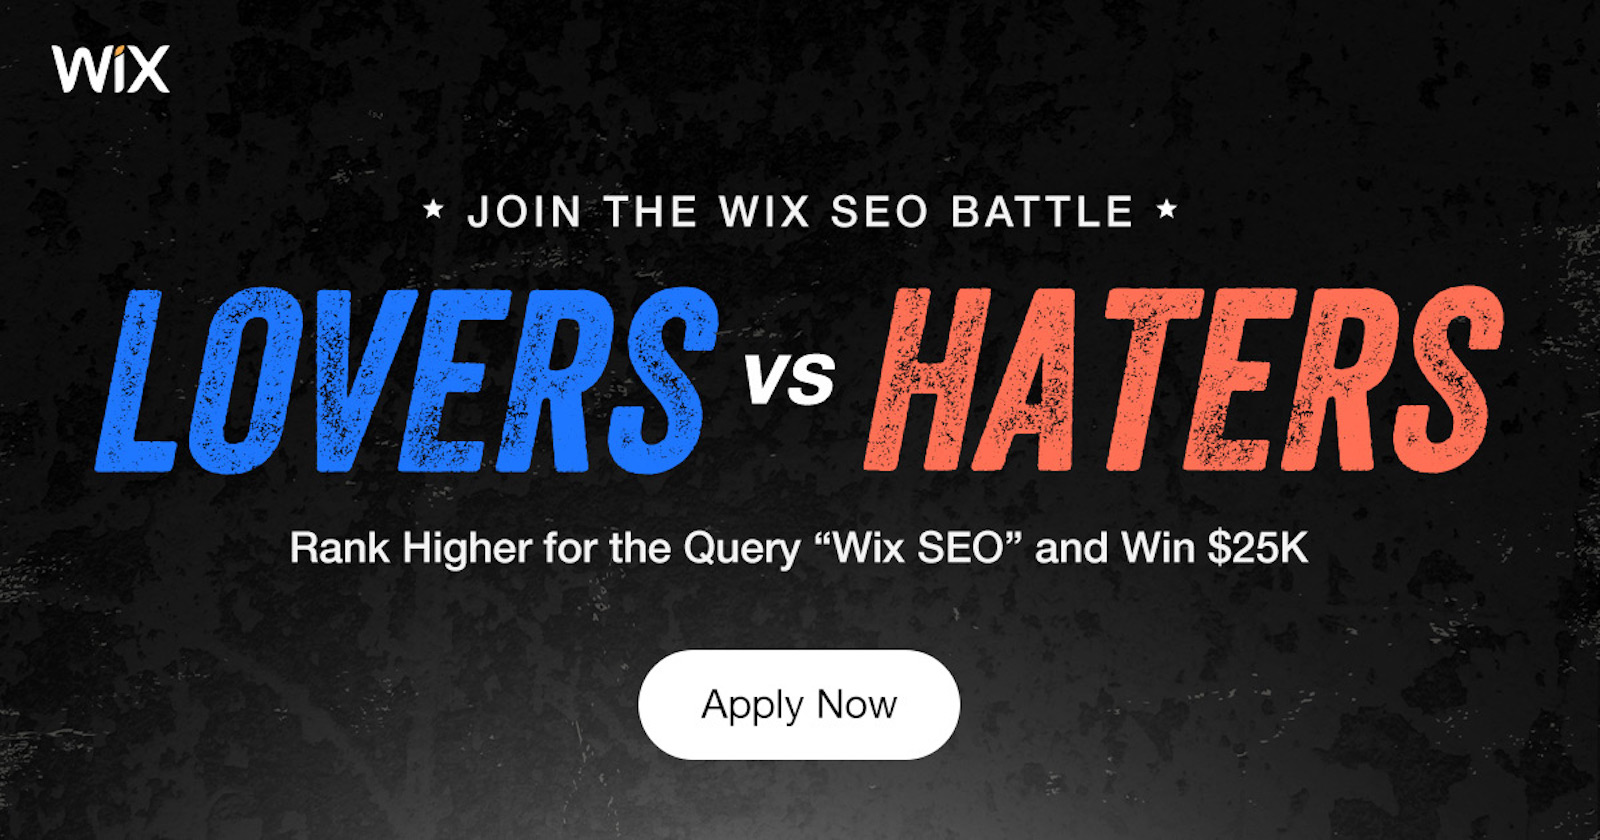 Wix SEO Lovers vs. Haters